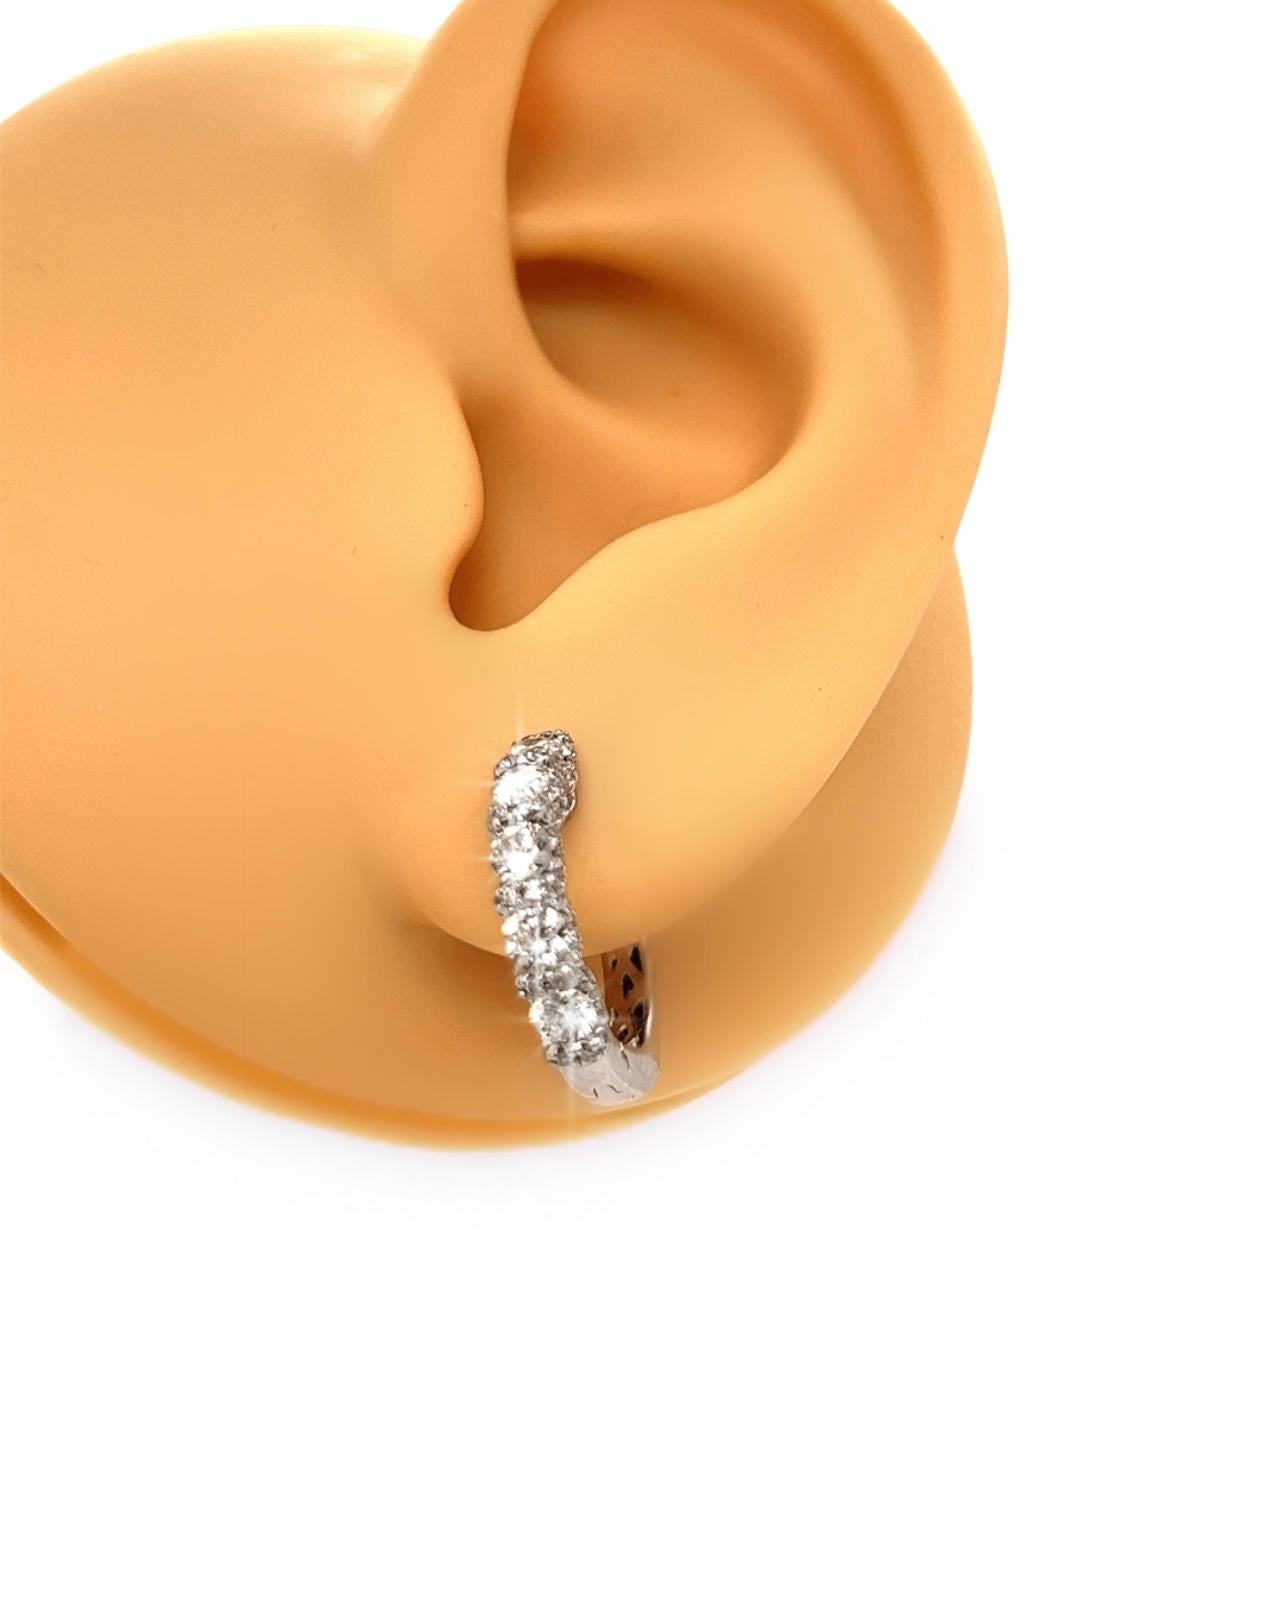 Round Cut Huggie Diamond Earrings with Pave Diamonds in Shared Prong Mounting